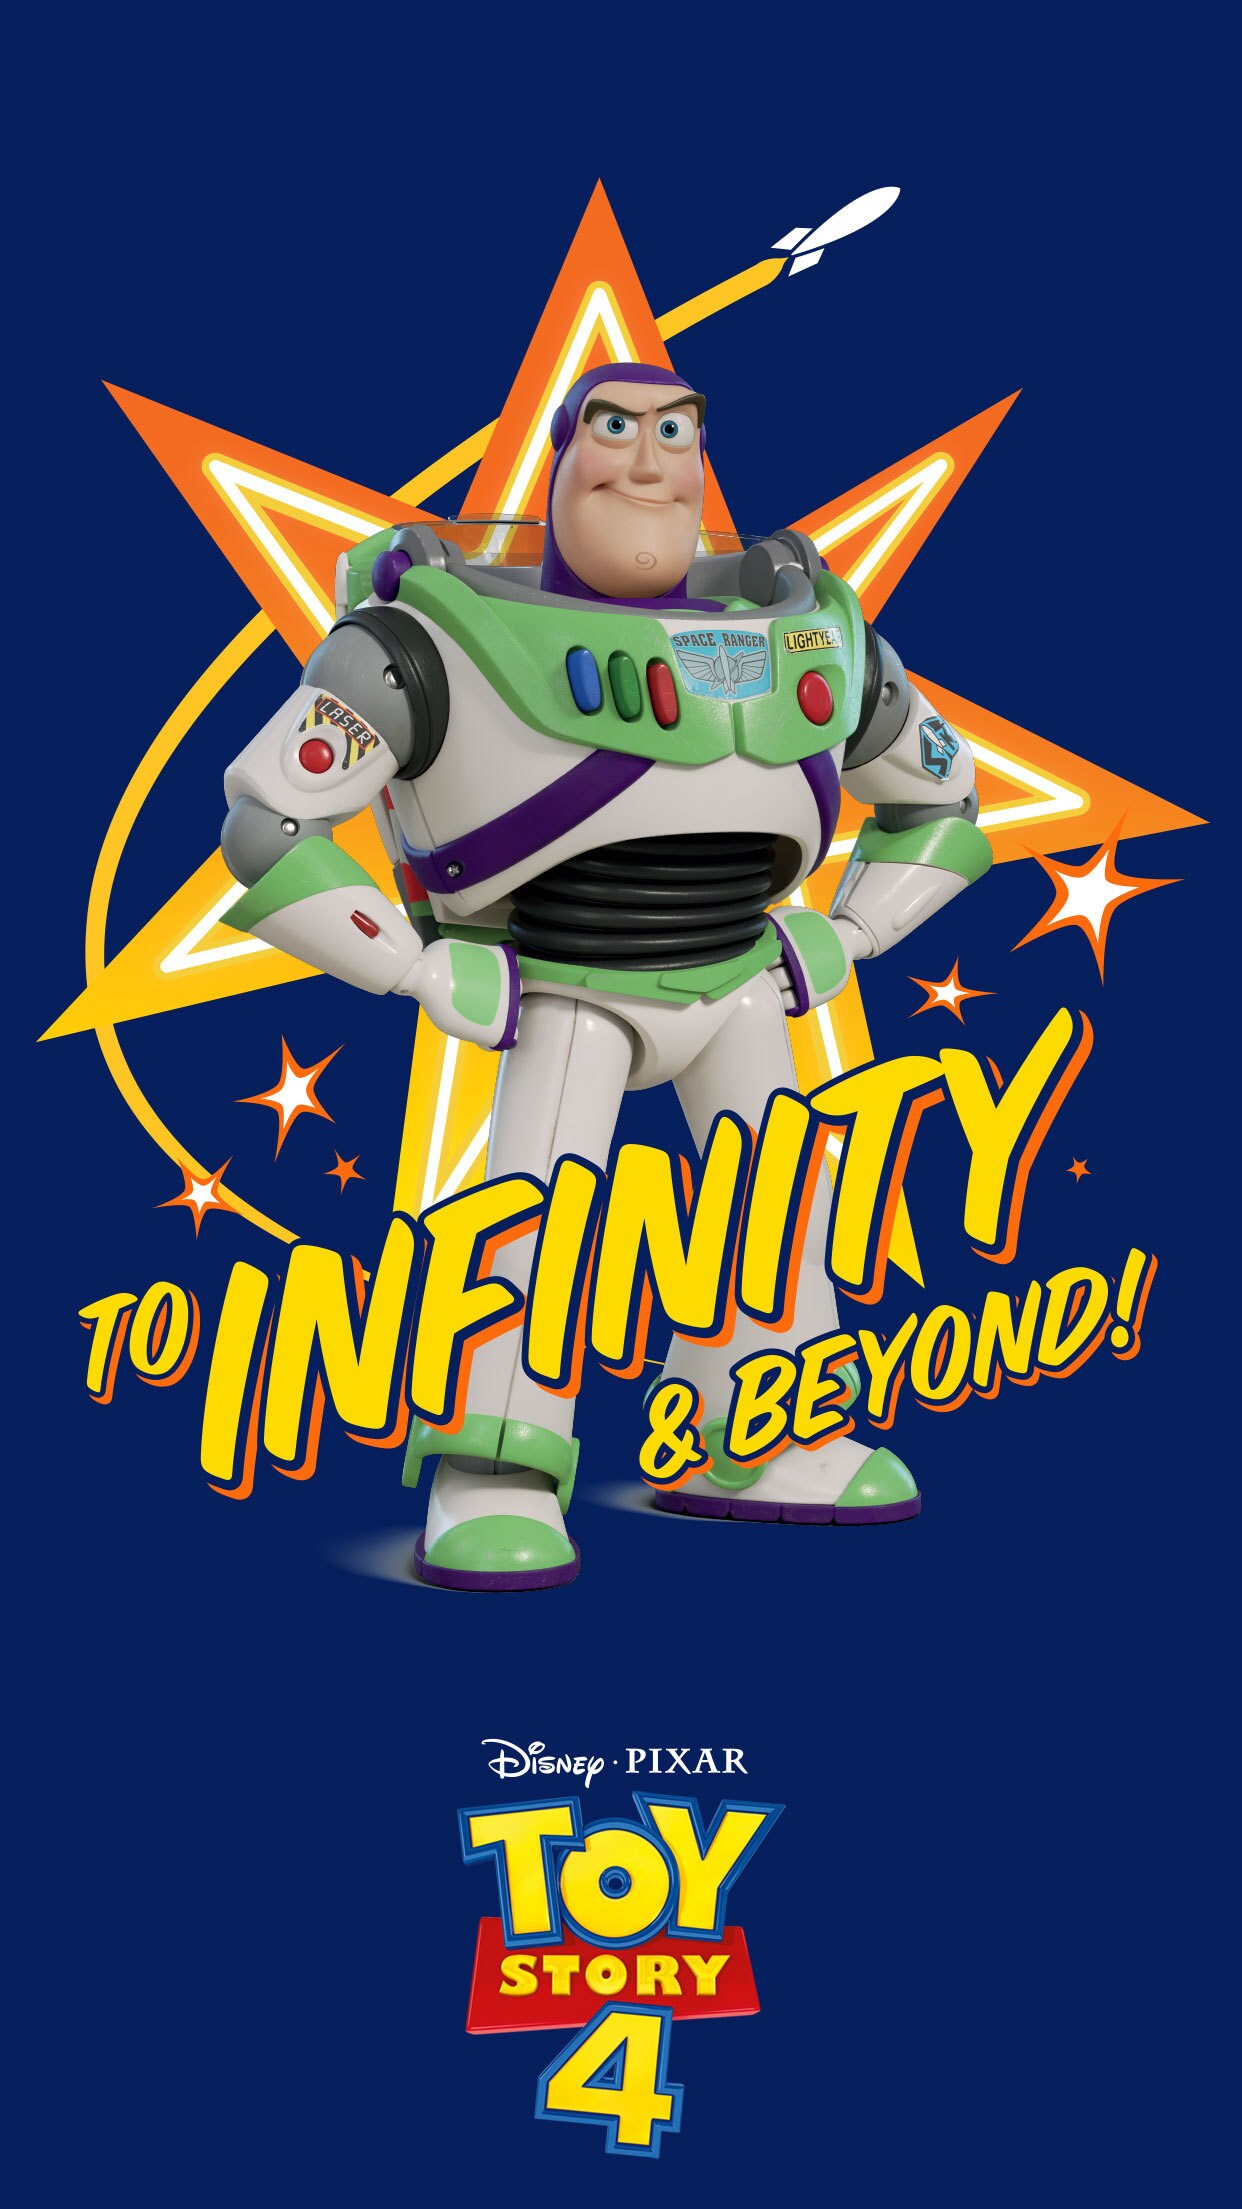 Go To Infinity And Beyond With These Disney And Pixar Toy Story 4 Mobile Wallpapers Disney Philippines